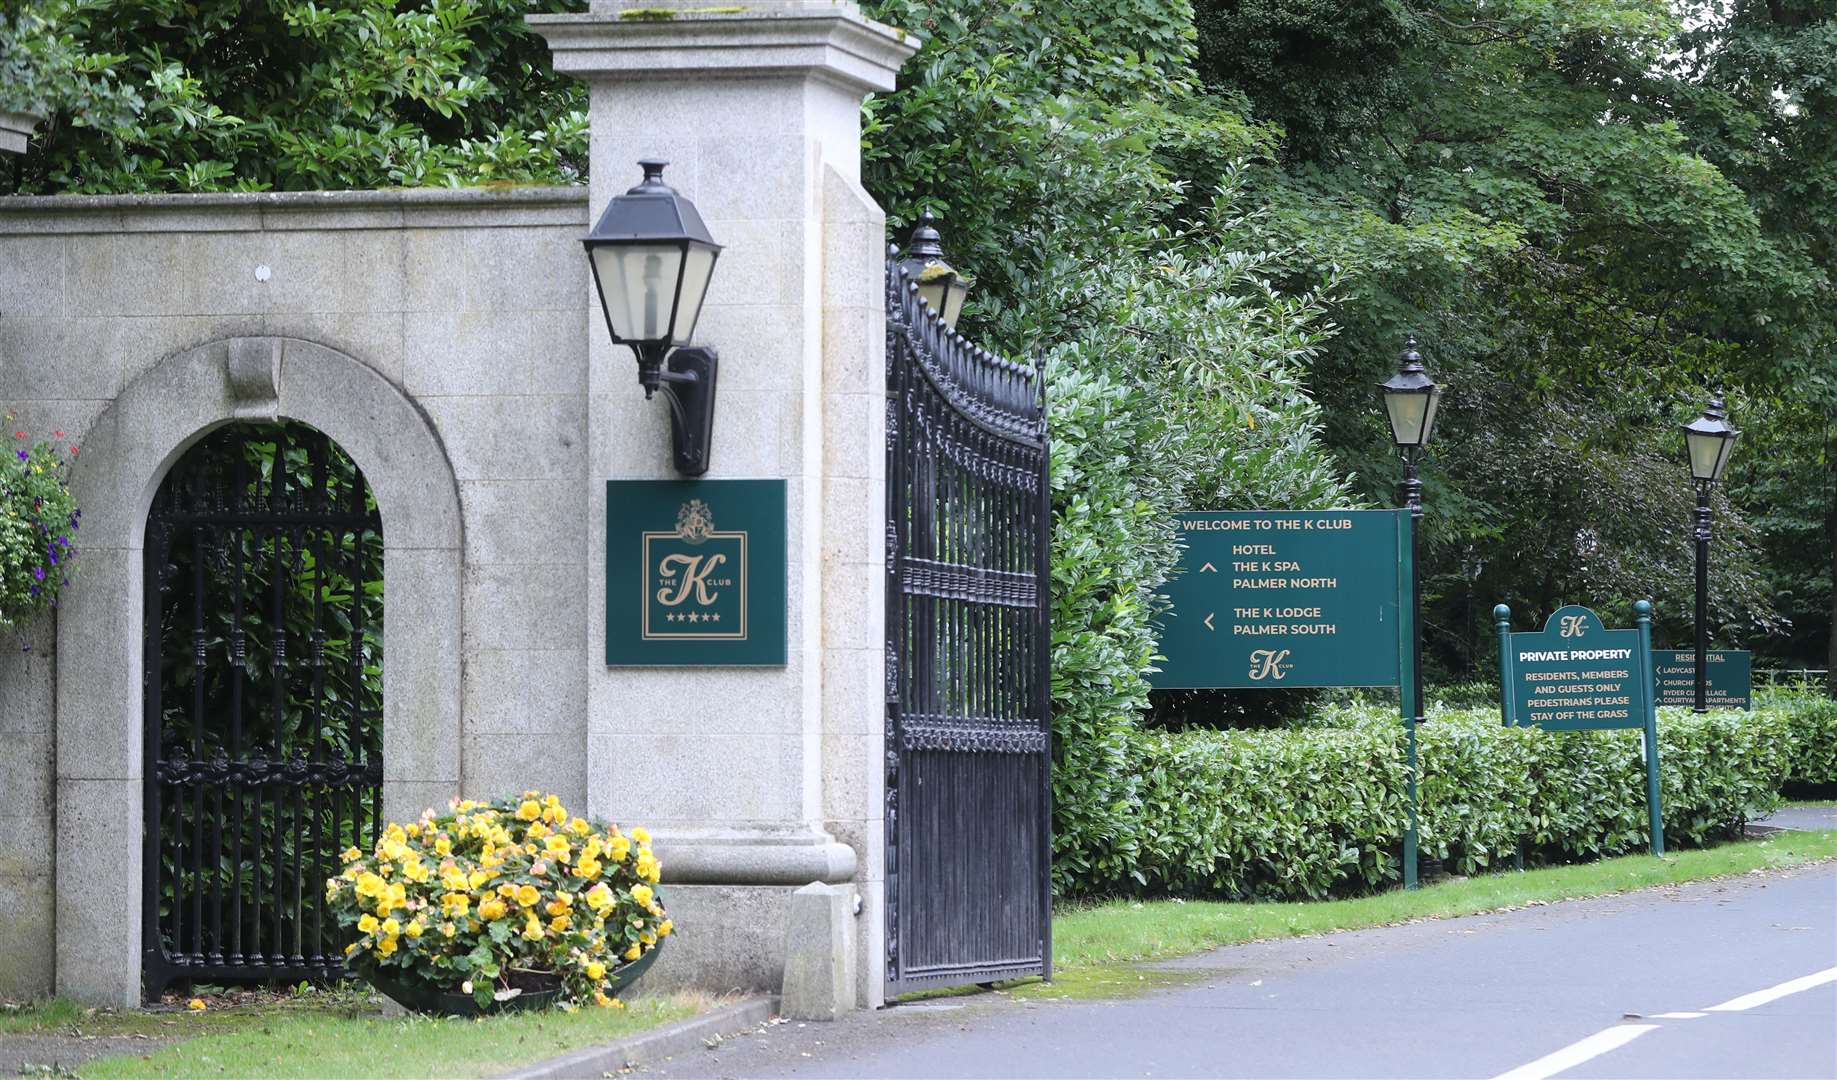 Mr Hogan stayed in Kildare at his residence in the luxury gated K Club resort (Niall Carson/PA)